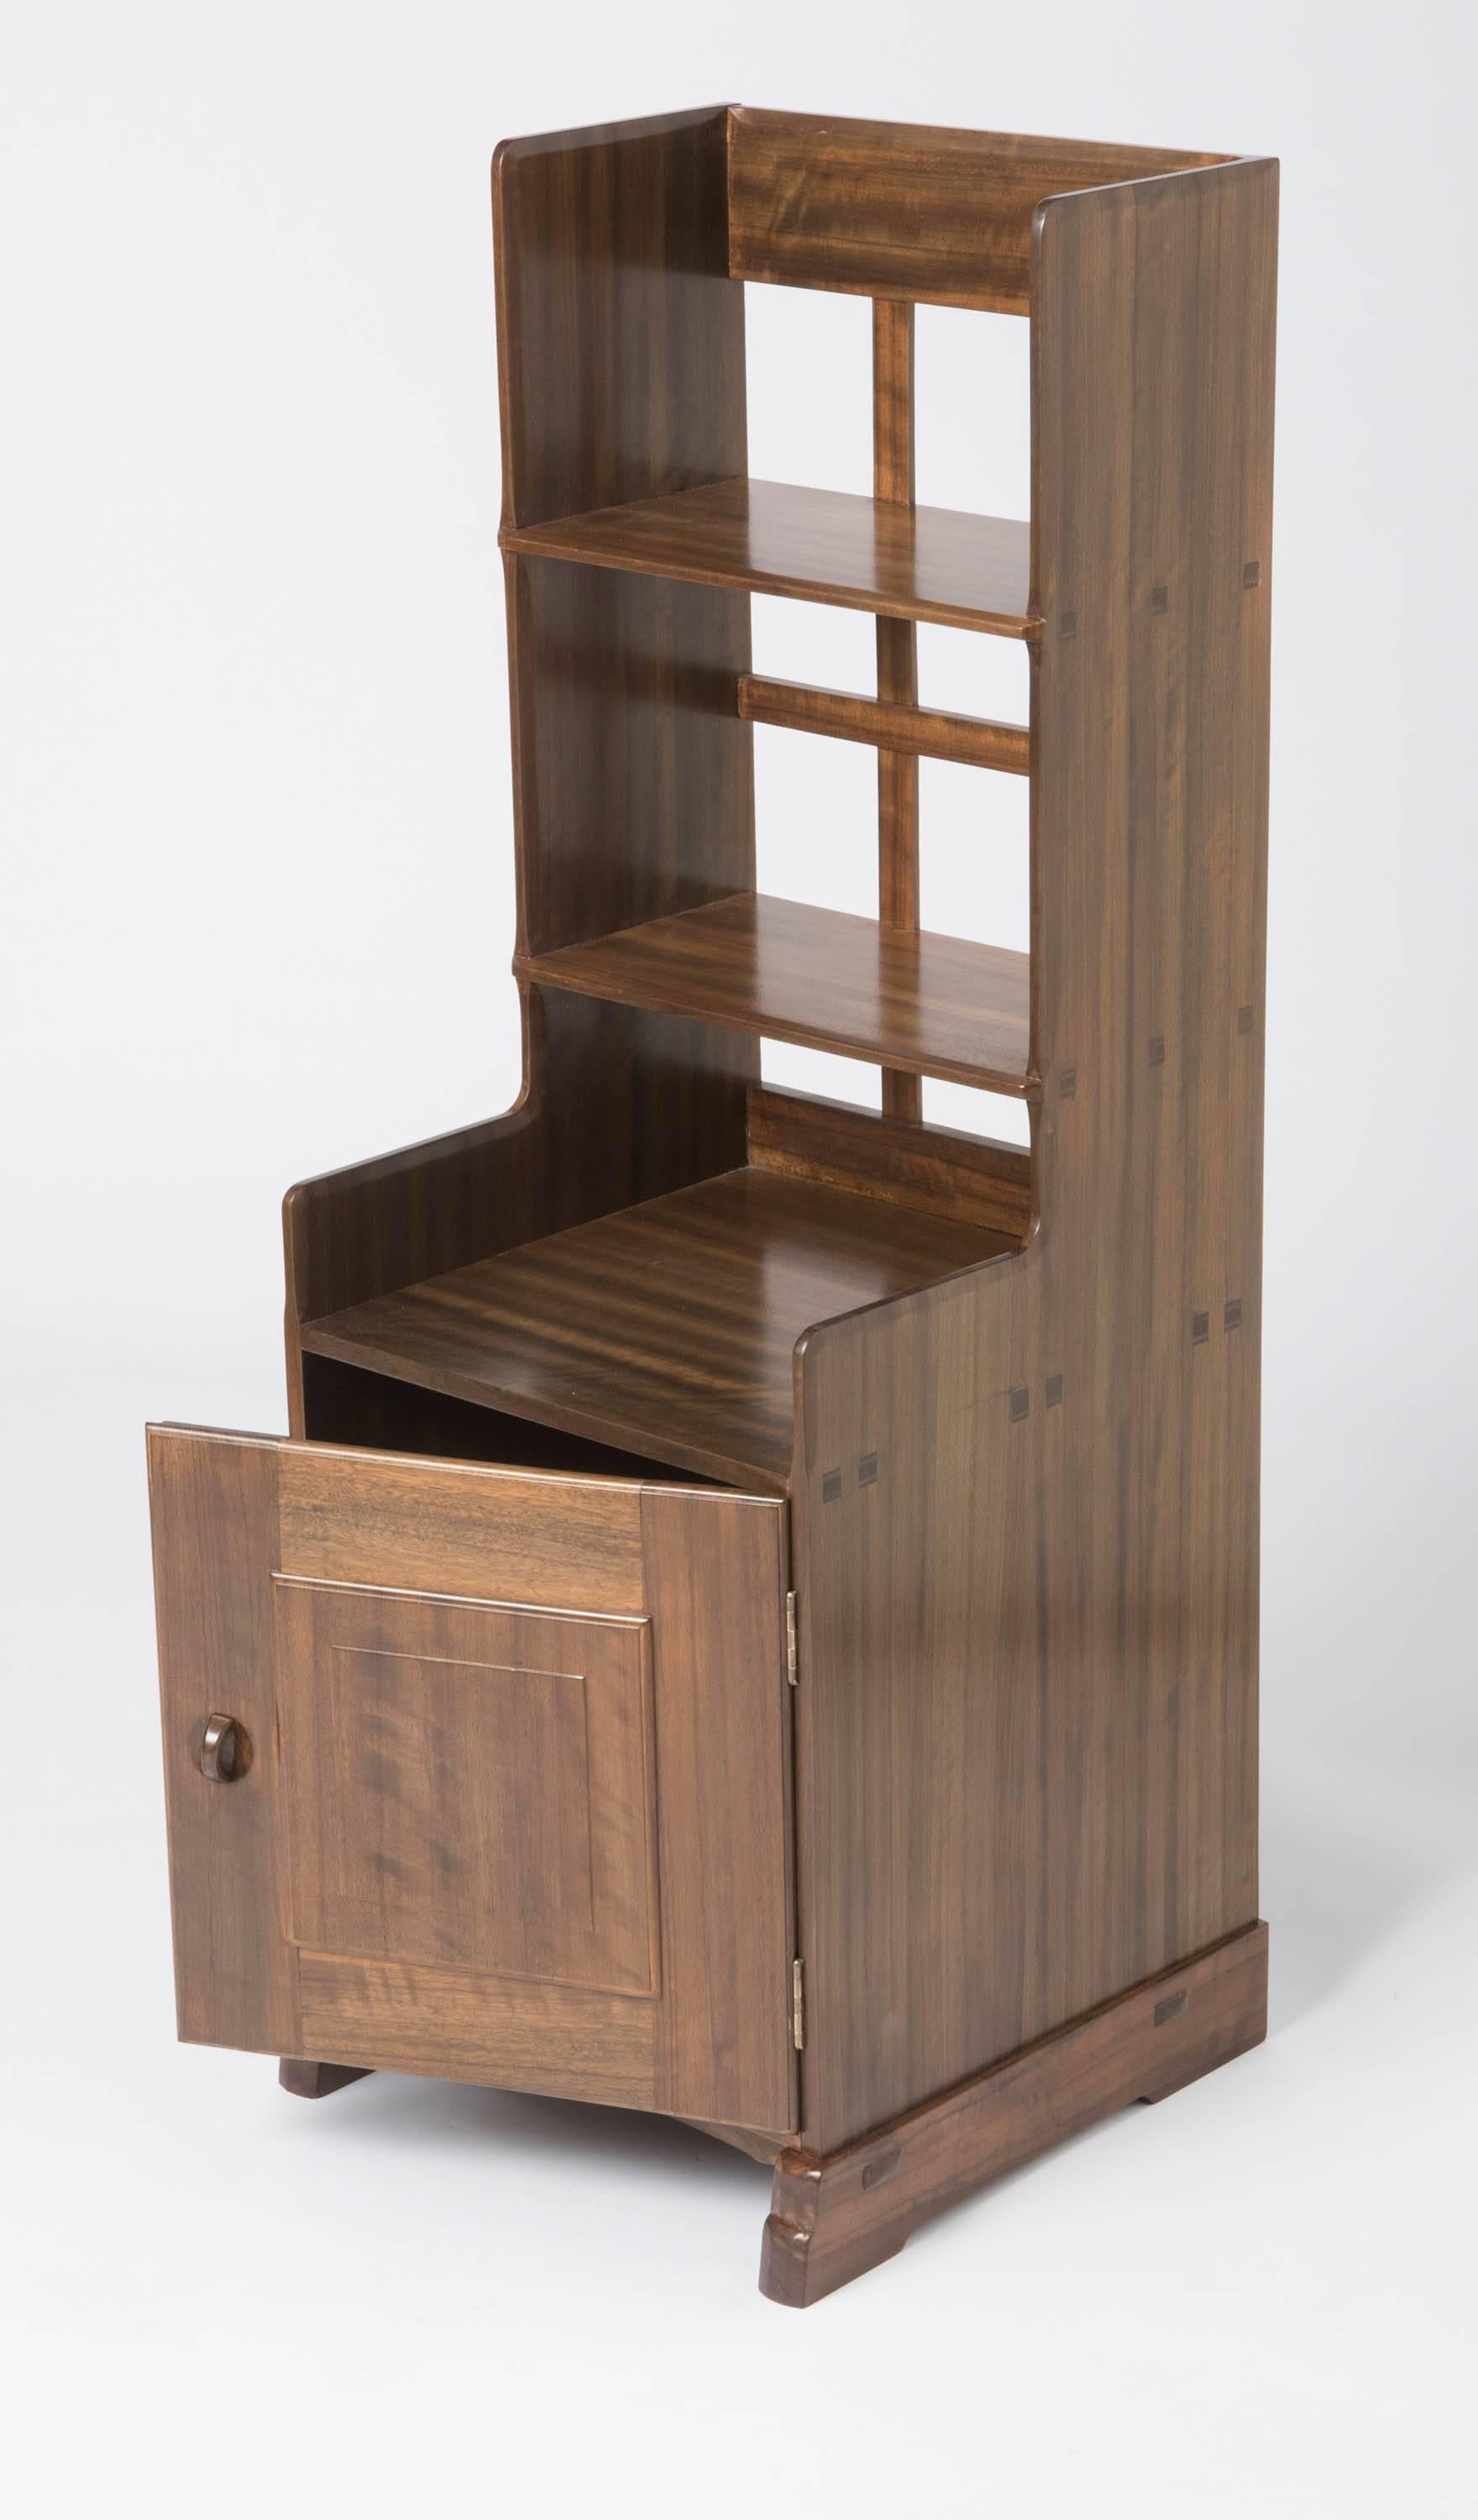 An Australian walnut bedside cabinet by Peter WaalsaAn Australian walnut bedside cabinet by Peter Waals.
The open slated back set with two shelves with chamfered edge detail.
The base with a cupboard with a stepped moulded cupboard door.
With an